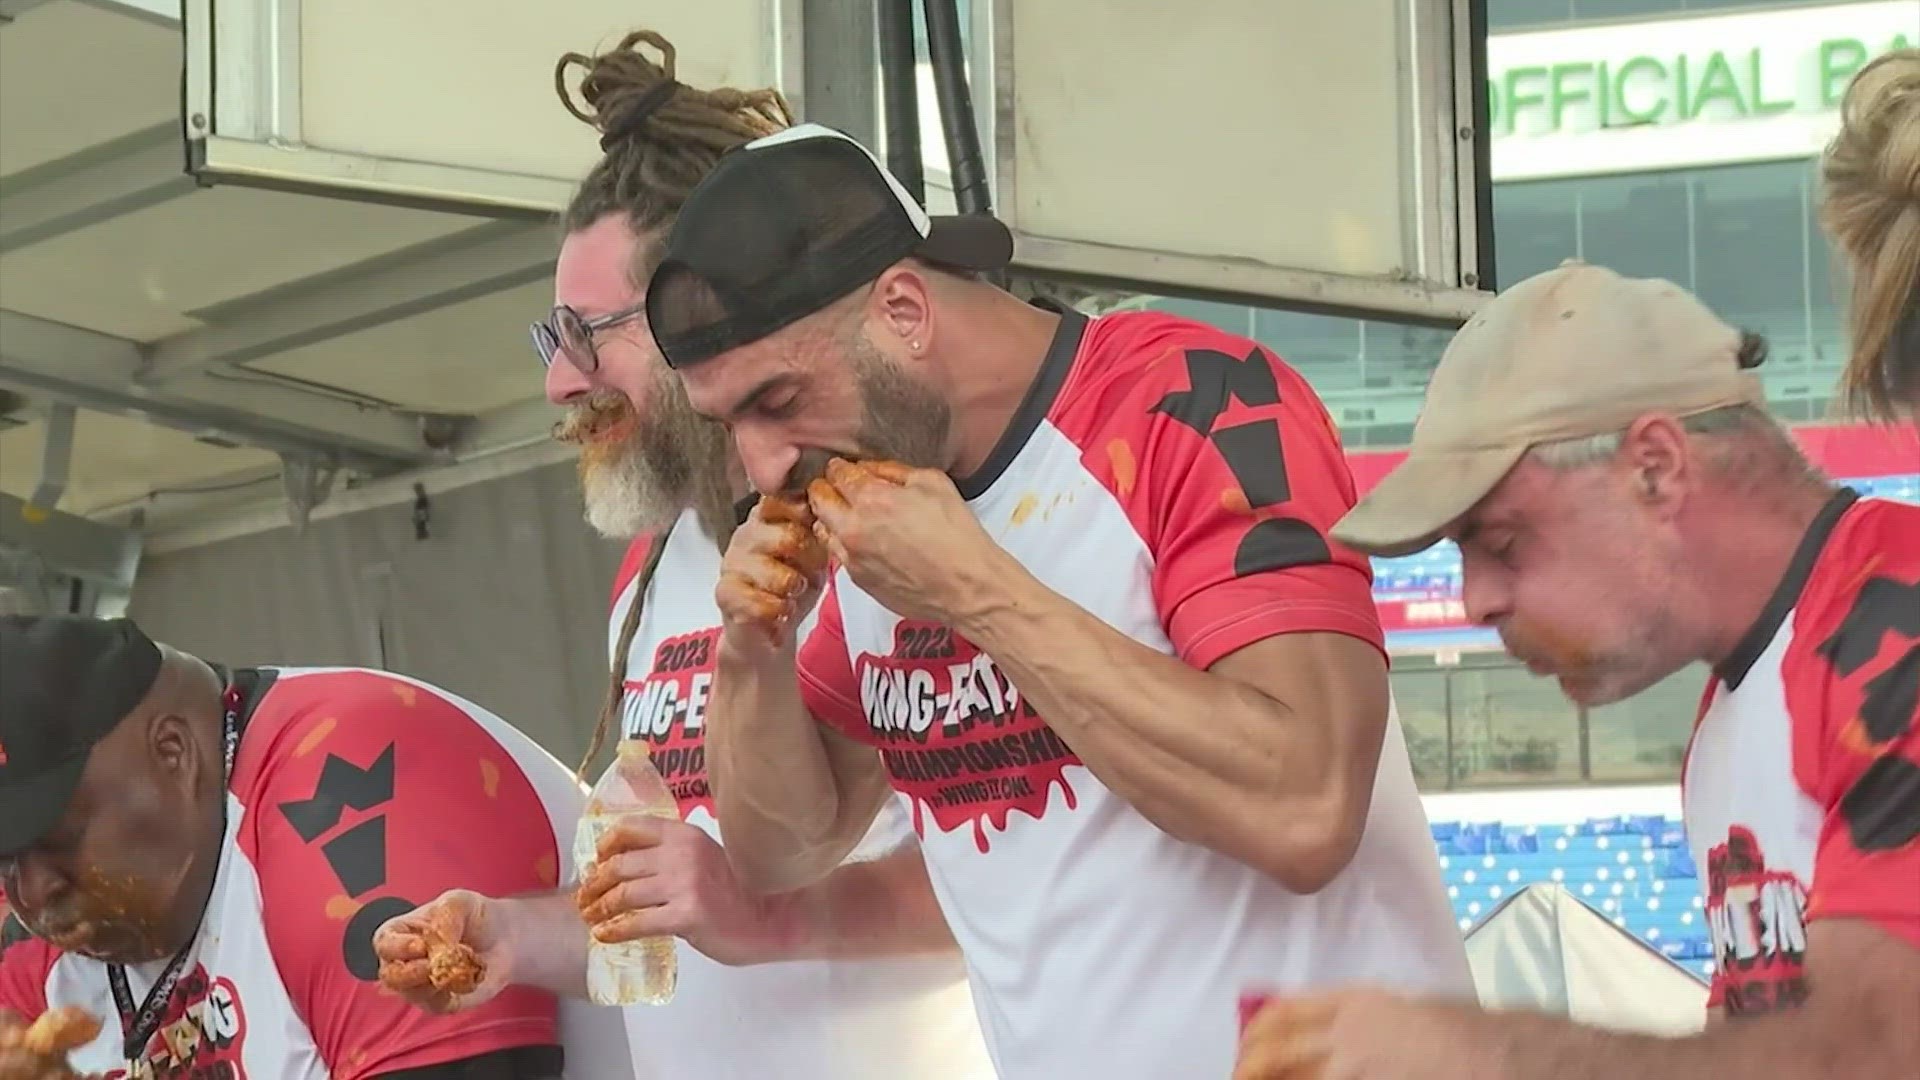 The No. 5-ranked eater in the world scarfed down 276 wings in 12 minutes as he cruised to victory.